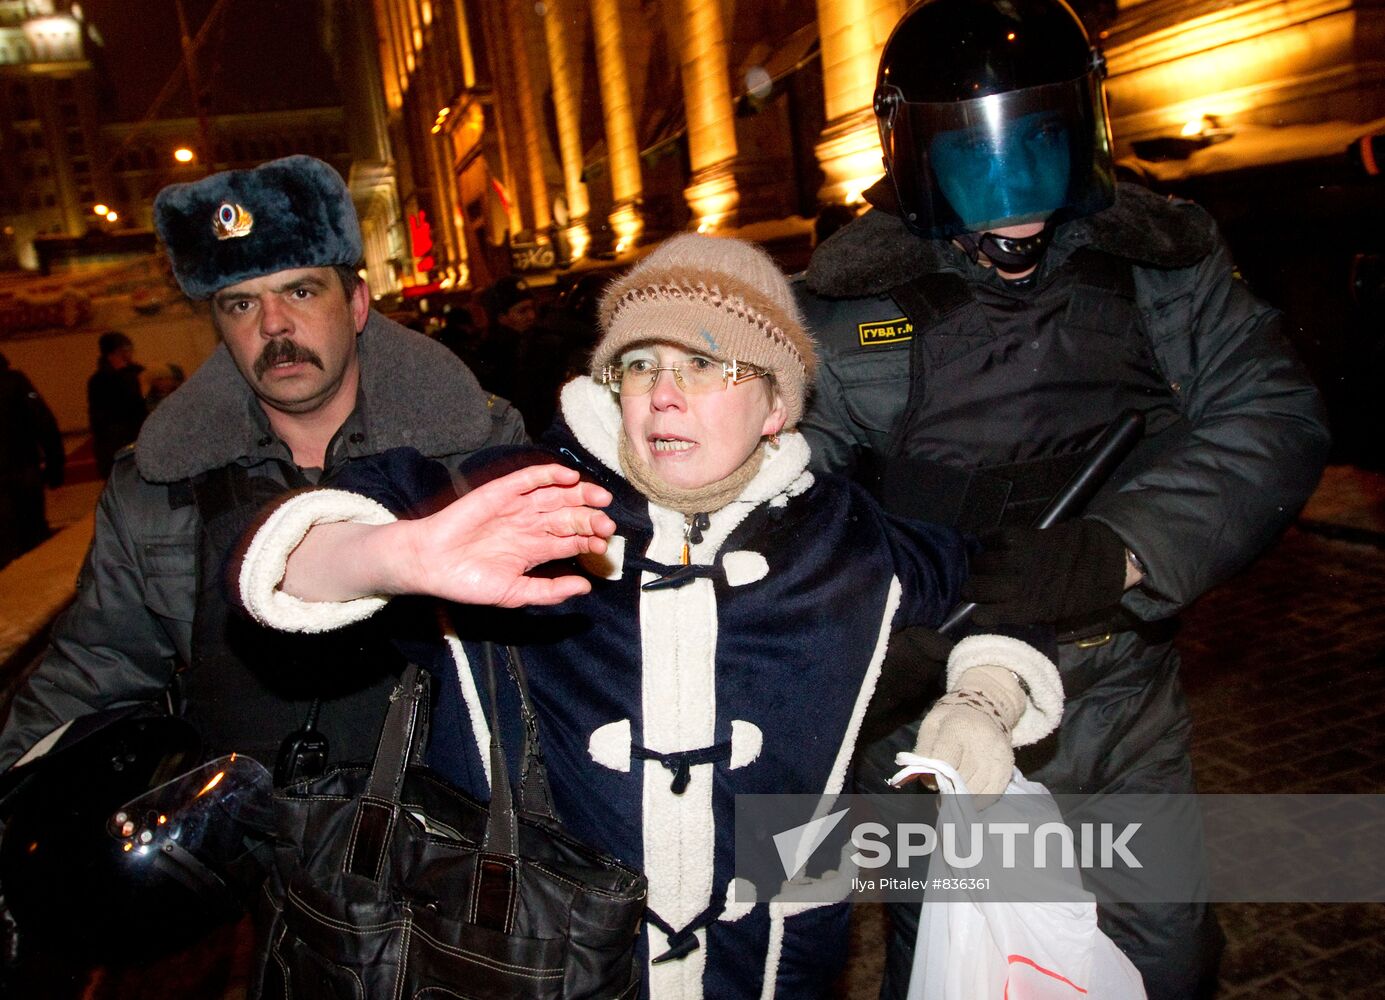 Rally in support of Article 31 of Russian Constitution in Moscow